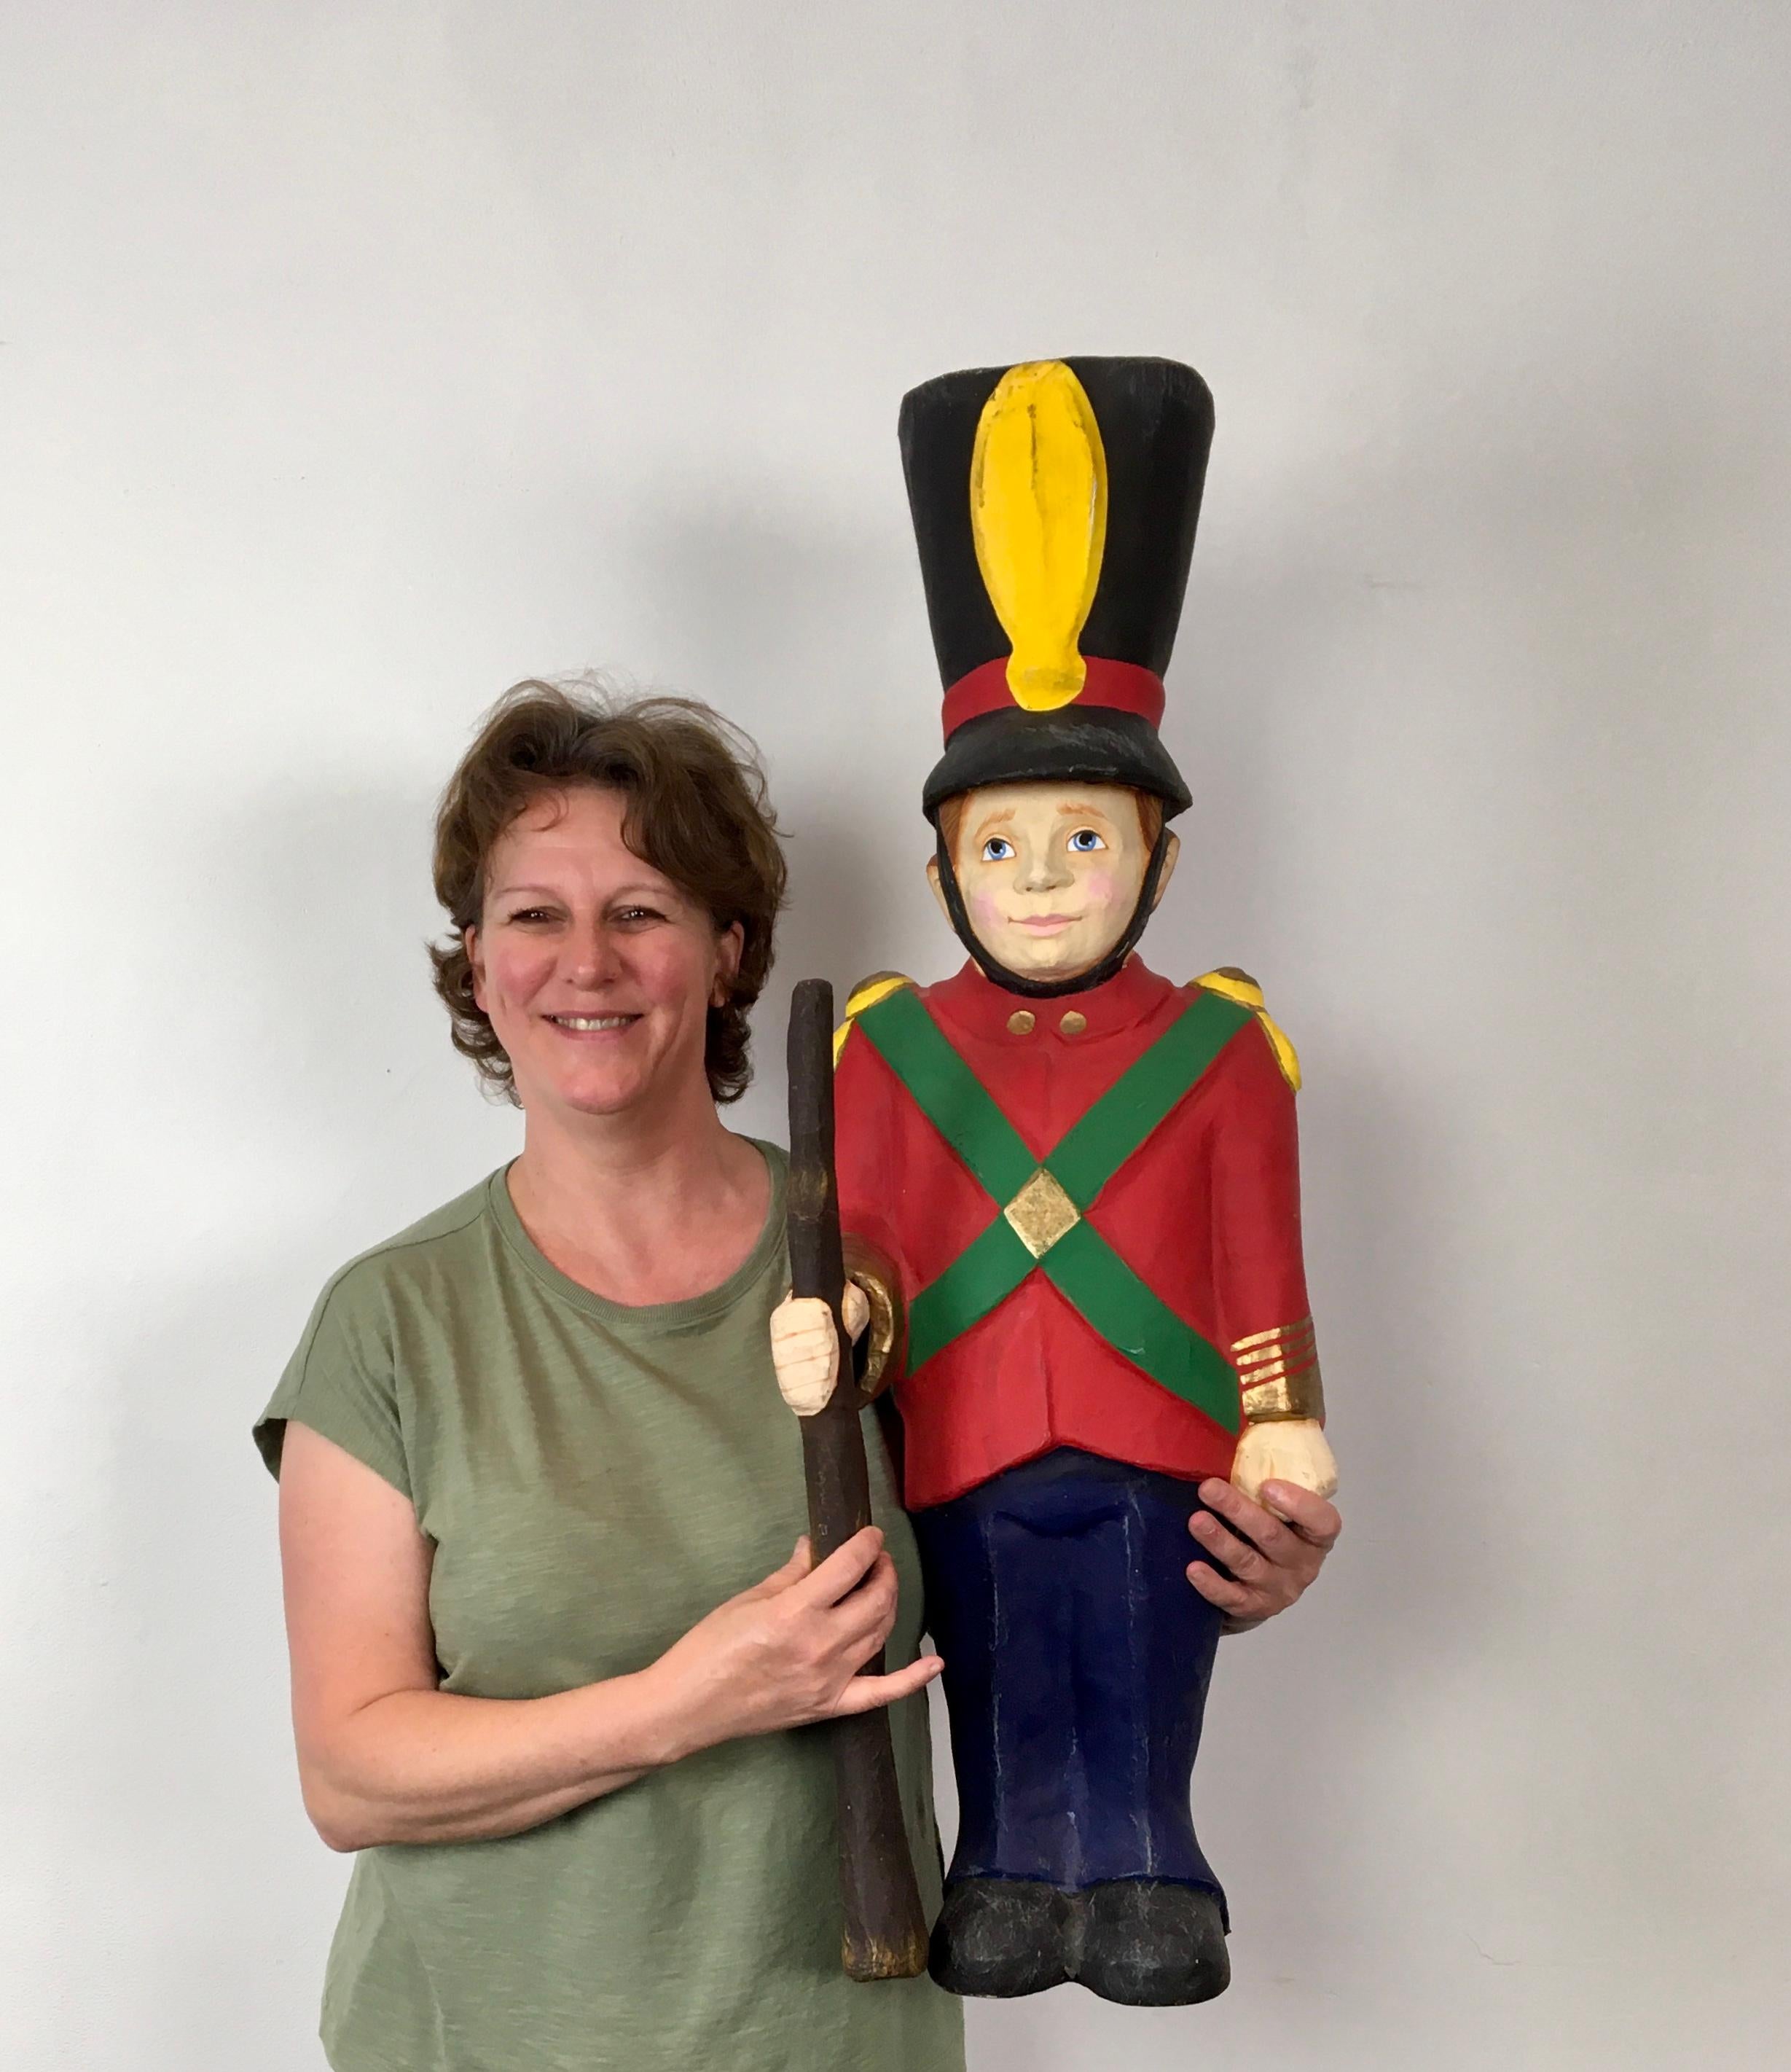 Vintage paper mache Royal guard doll.
This Royal guardian soldier has a beautiful uniform or costume: blue pants, red coat with green stripes and yellow shoulder pads, golden accents and large black hat with yellow logo. This cavalry soldier is